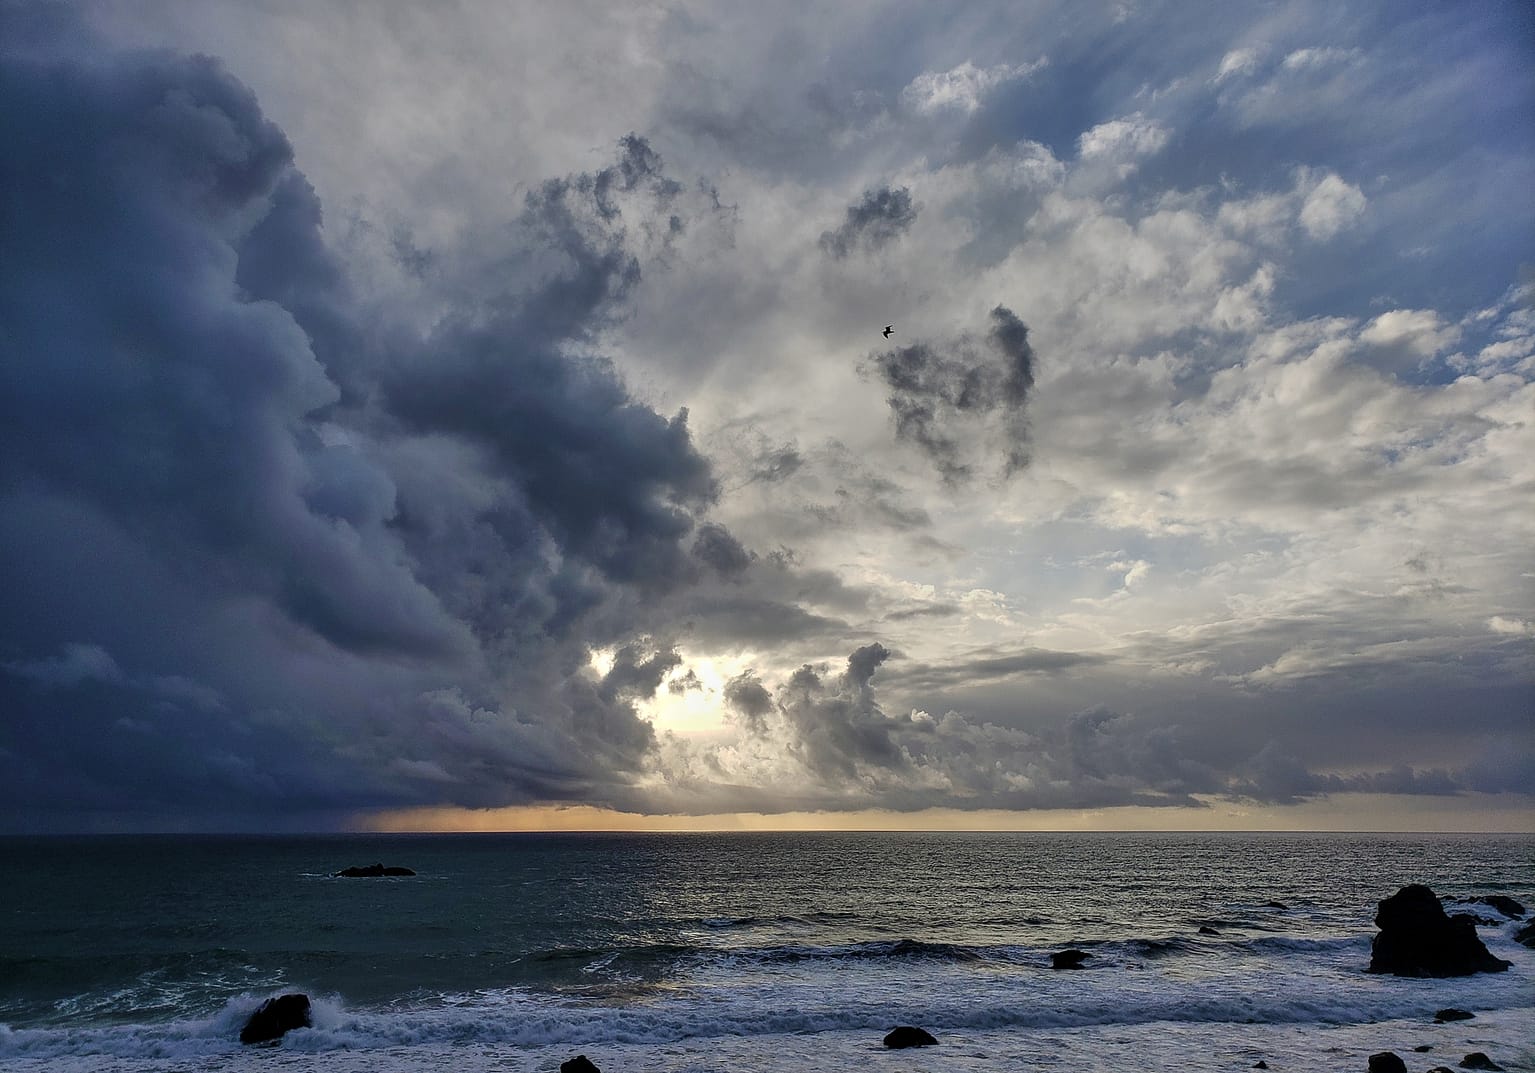 Towering dark storm clouds moving in over the Pacific surf with rain, while sunlight shines through a hole in the sky.